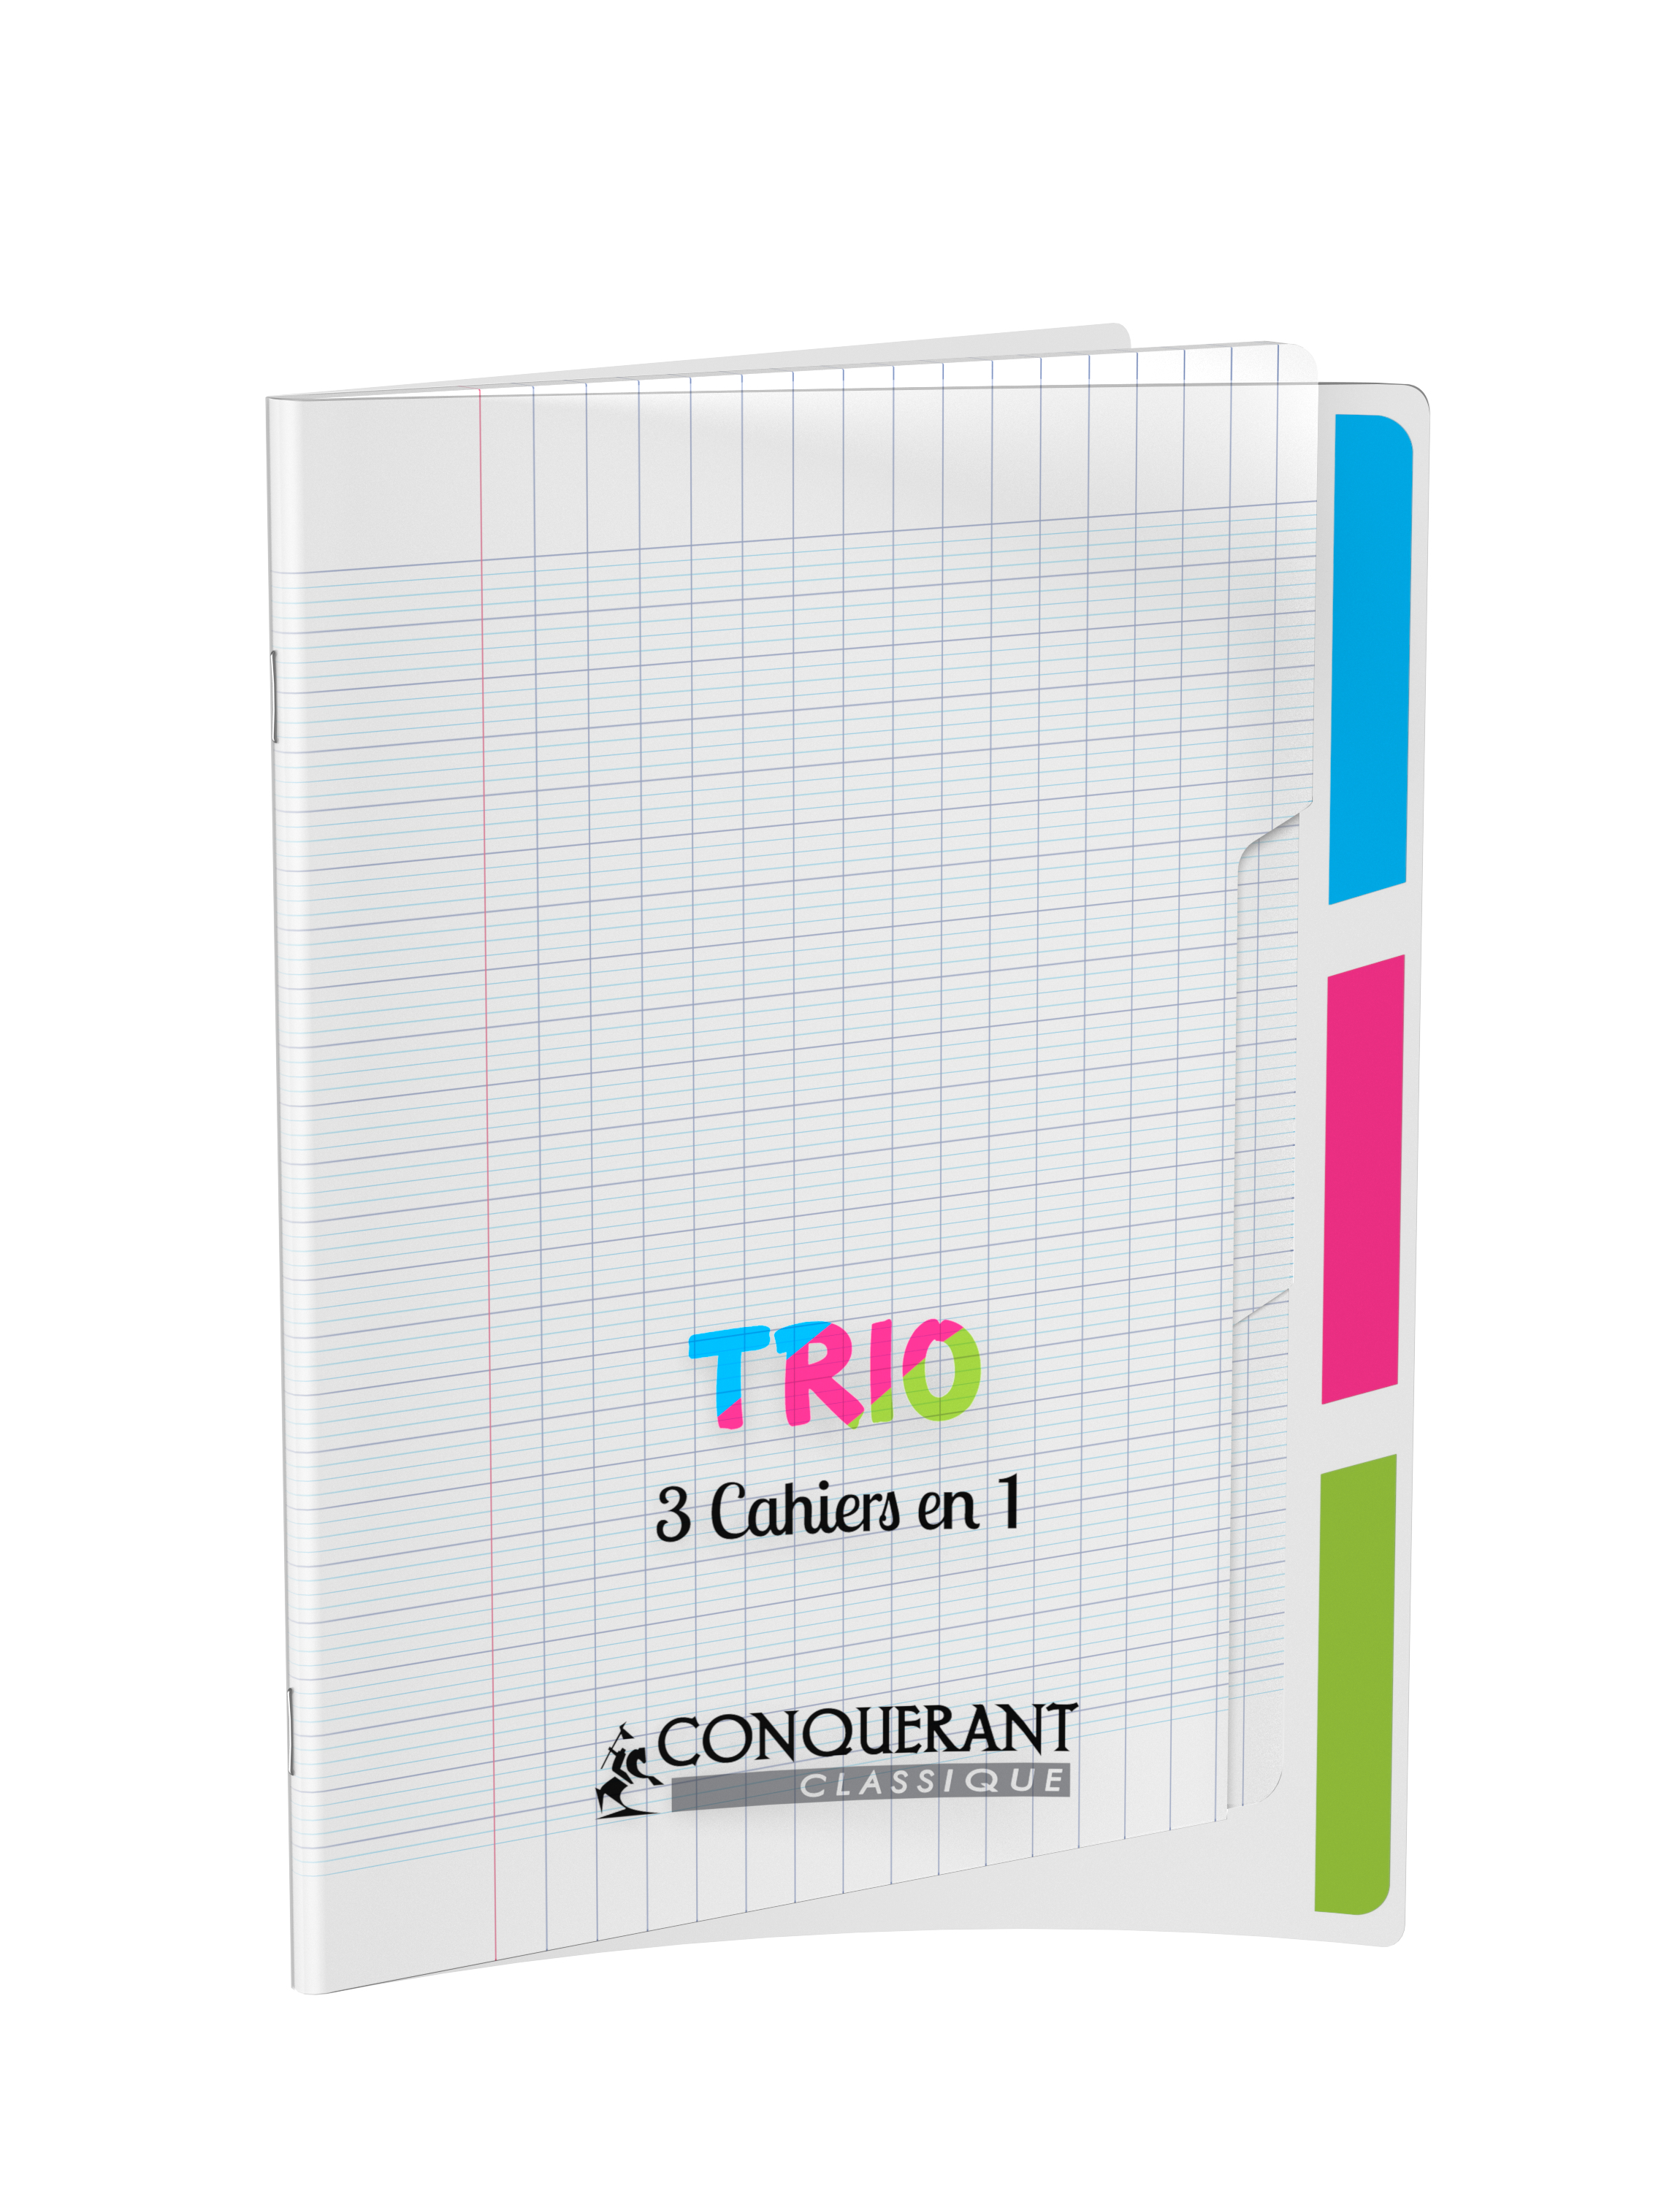 Cahier scolaire 24x32cm 96 pages 70g assortis